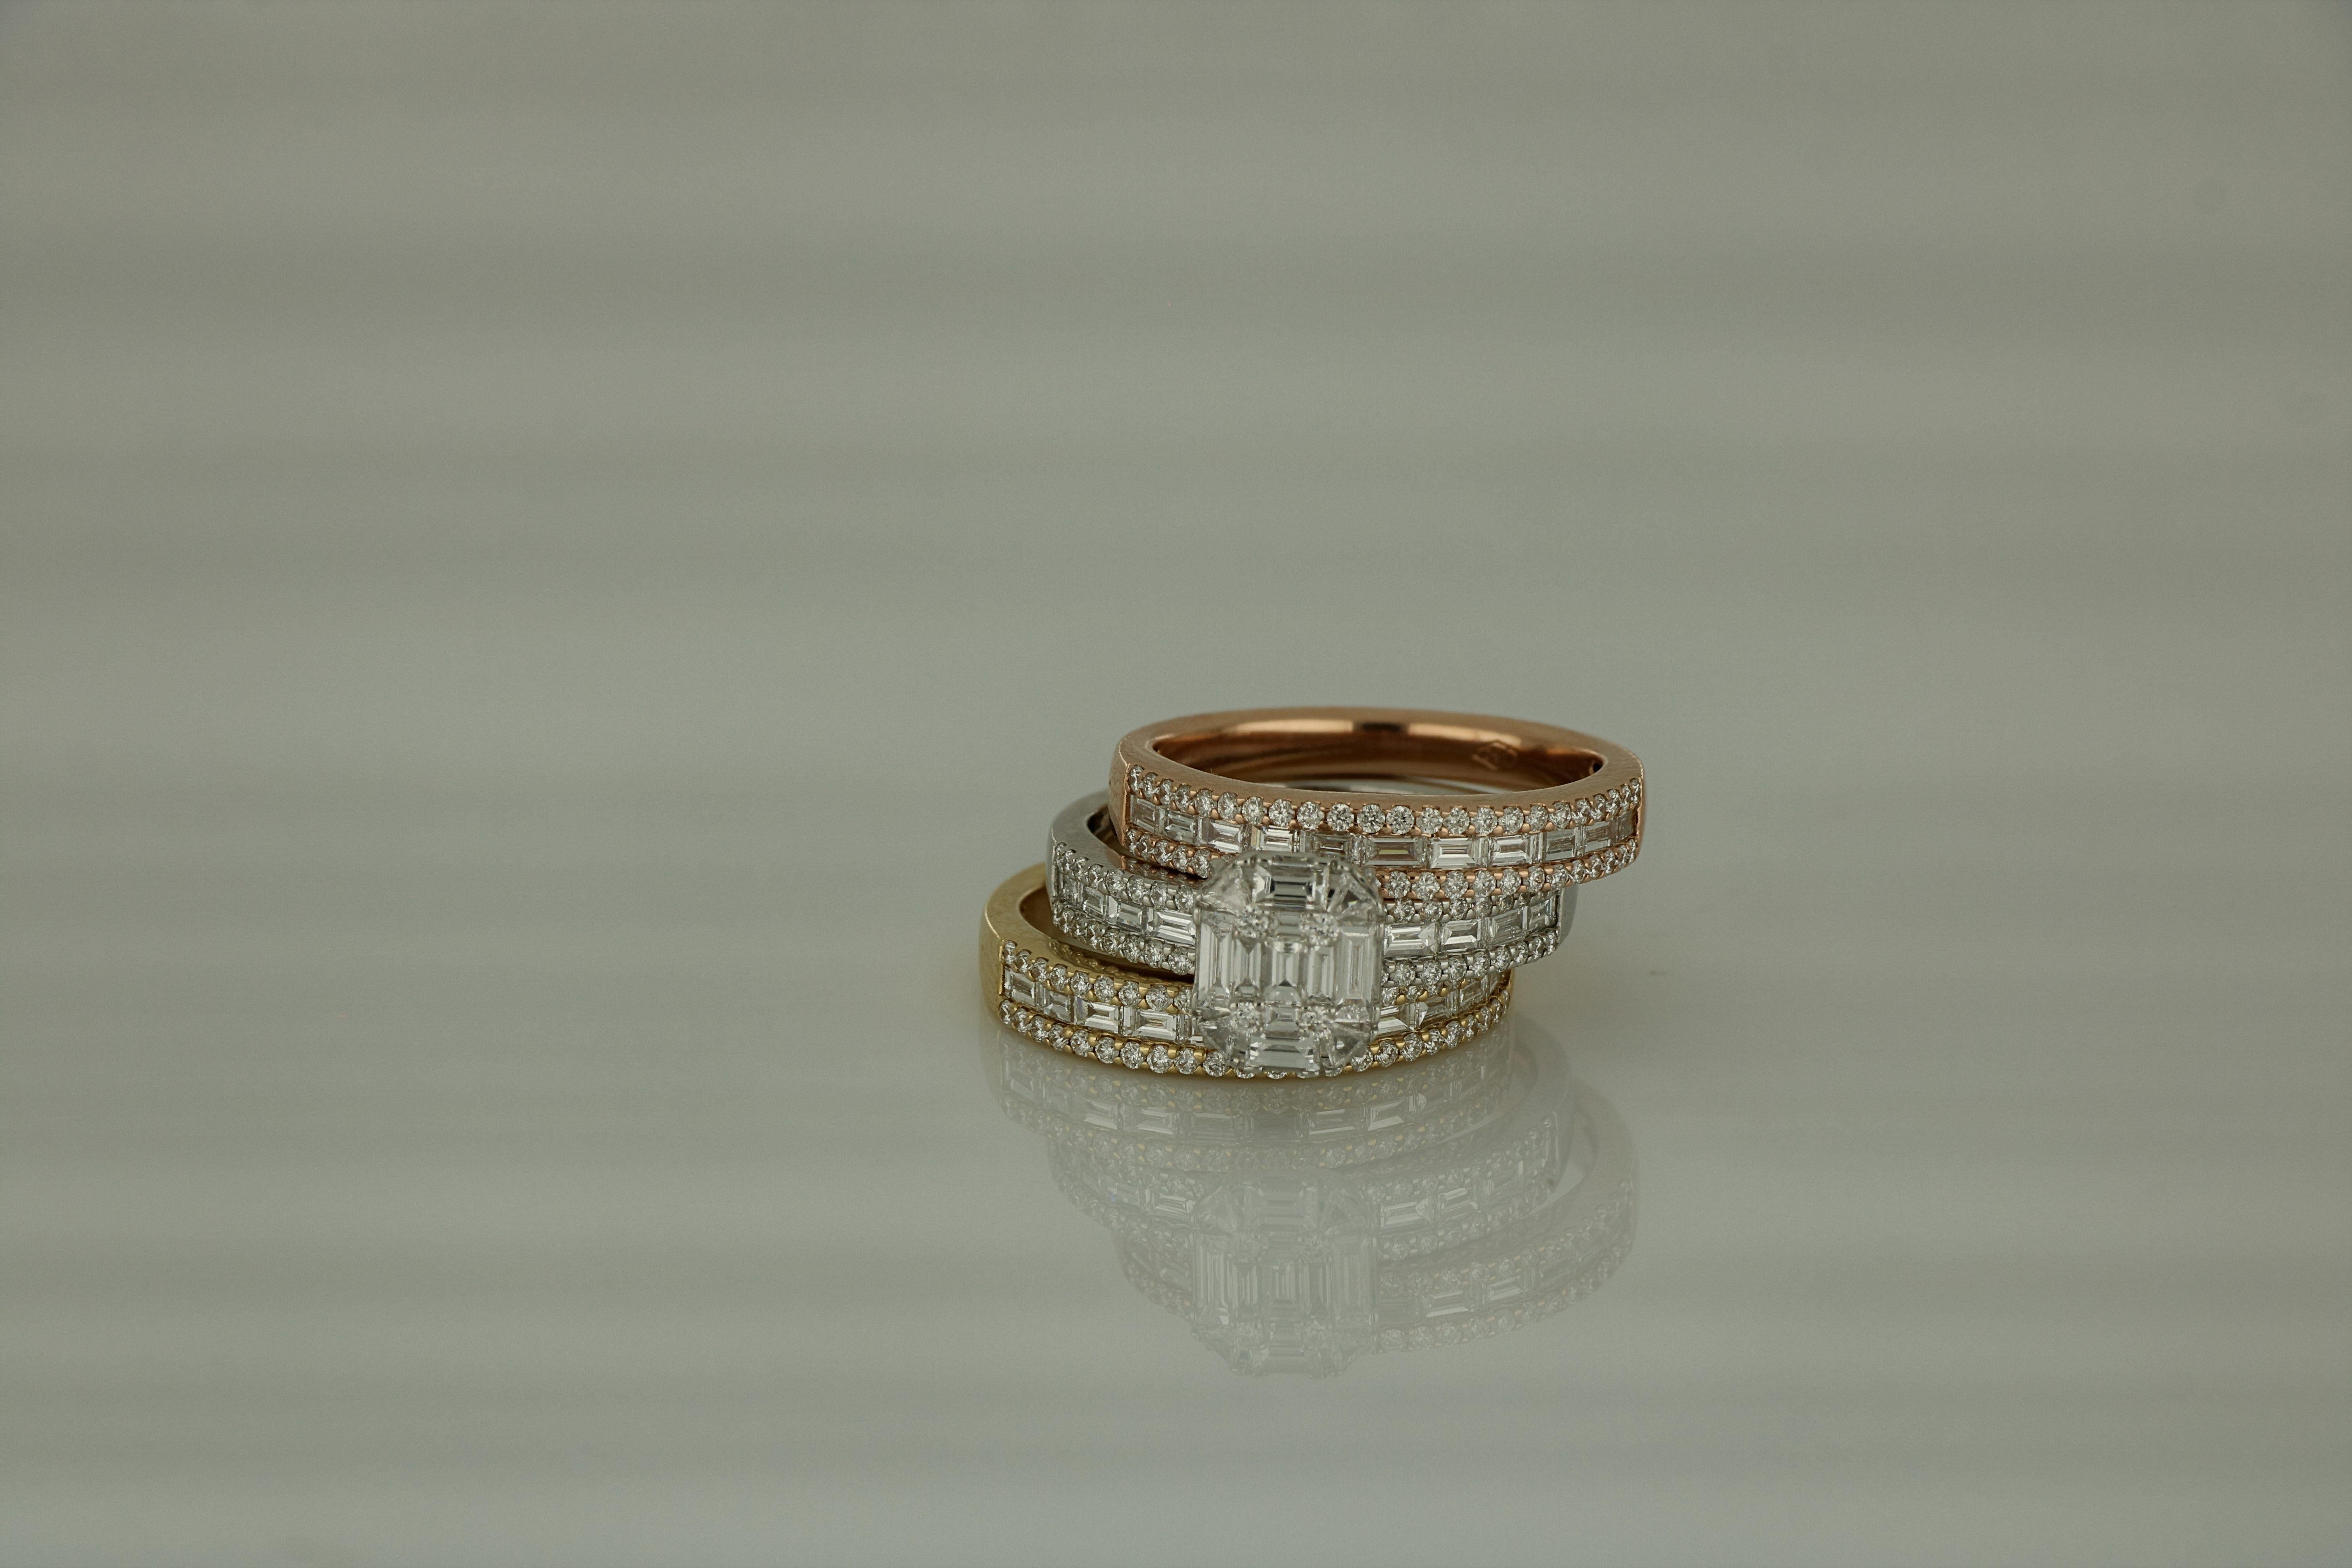 Sleek rows of small Baguette Diamonds grouped by a master round and emerald diamond frame three faceted rose ,white and yellow gold bands that rotate independently of each other ,catching and reflecting the light , in this graphic Amwaj Signature